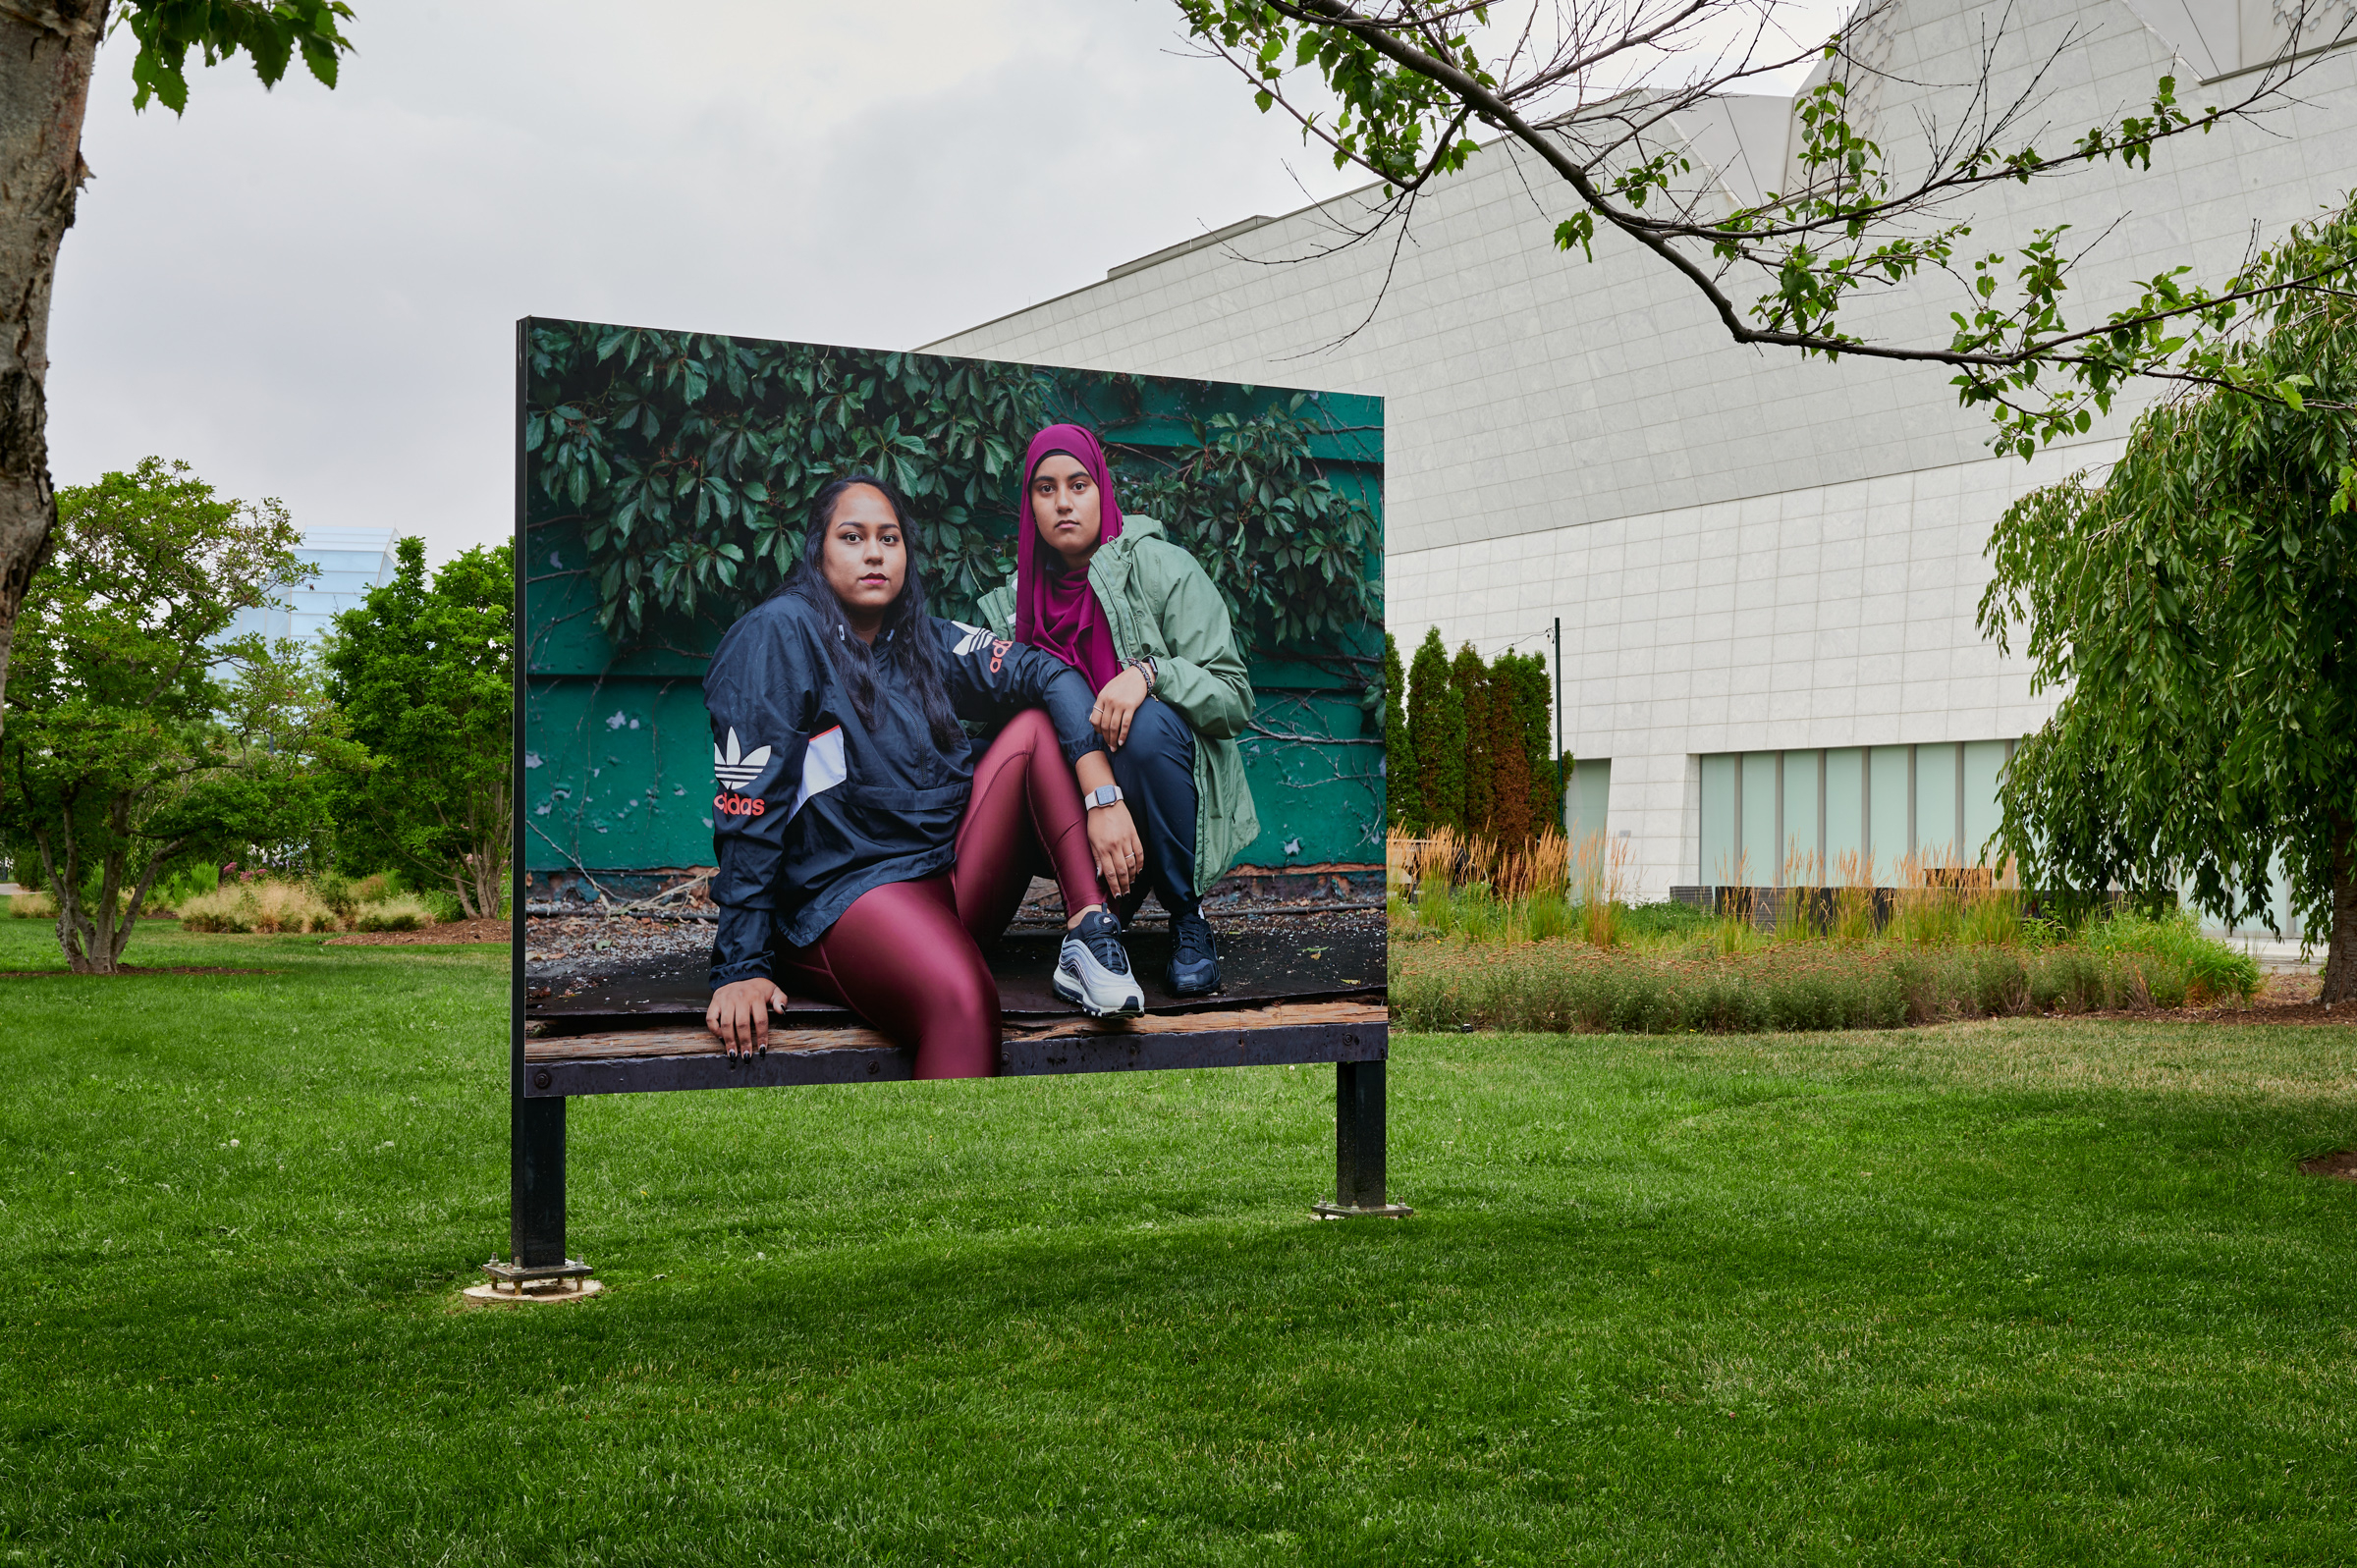     Mahtab Hussain, An Ocean in a Drop: Muslims in Toronto, installation view, Aga Khan Museum and Park, 2022. Courtesy of the artist, Aga Khan Museum, and CONTACT. Photo: Todd Fraser

